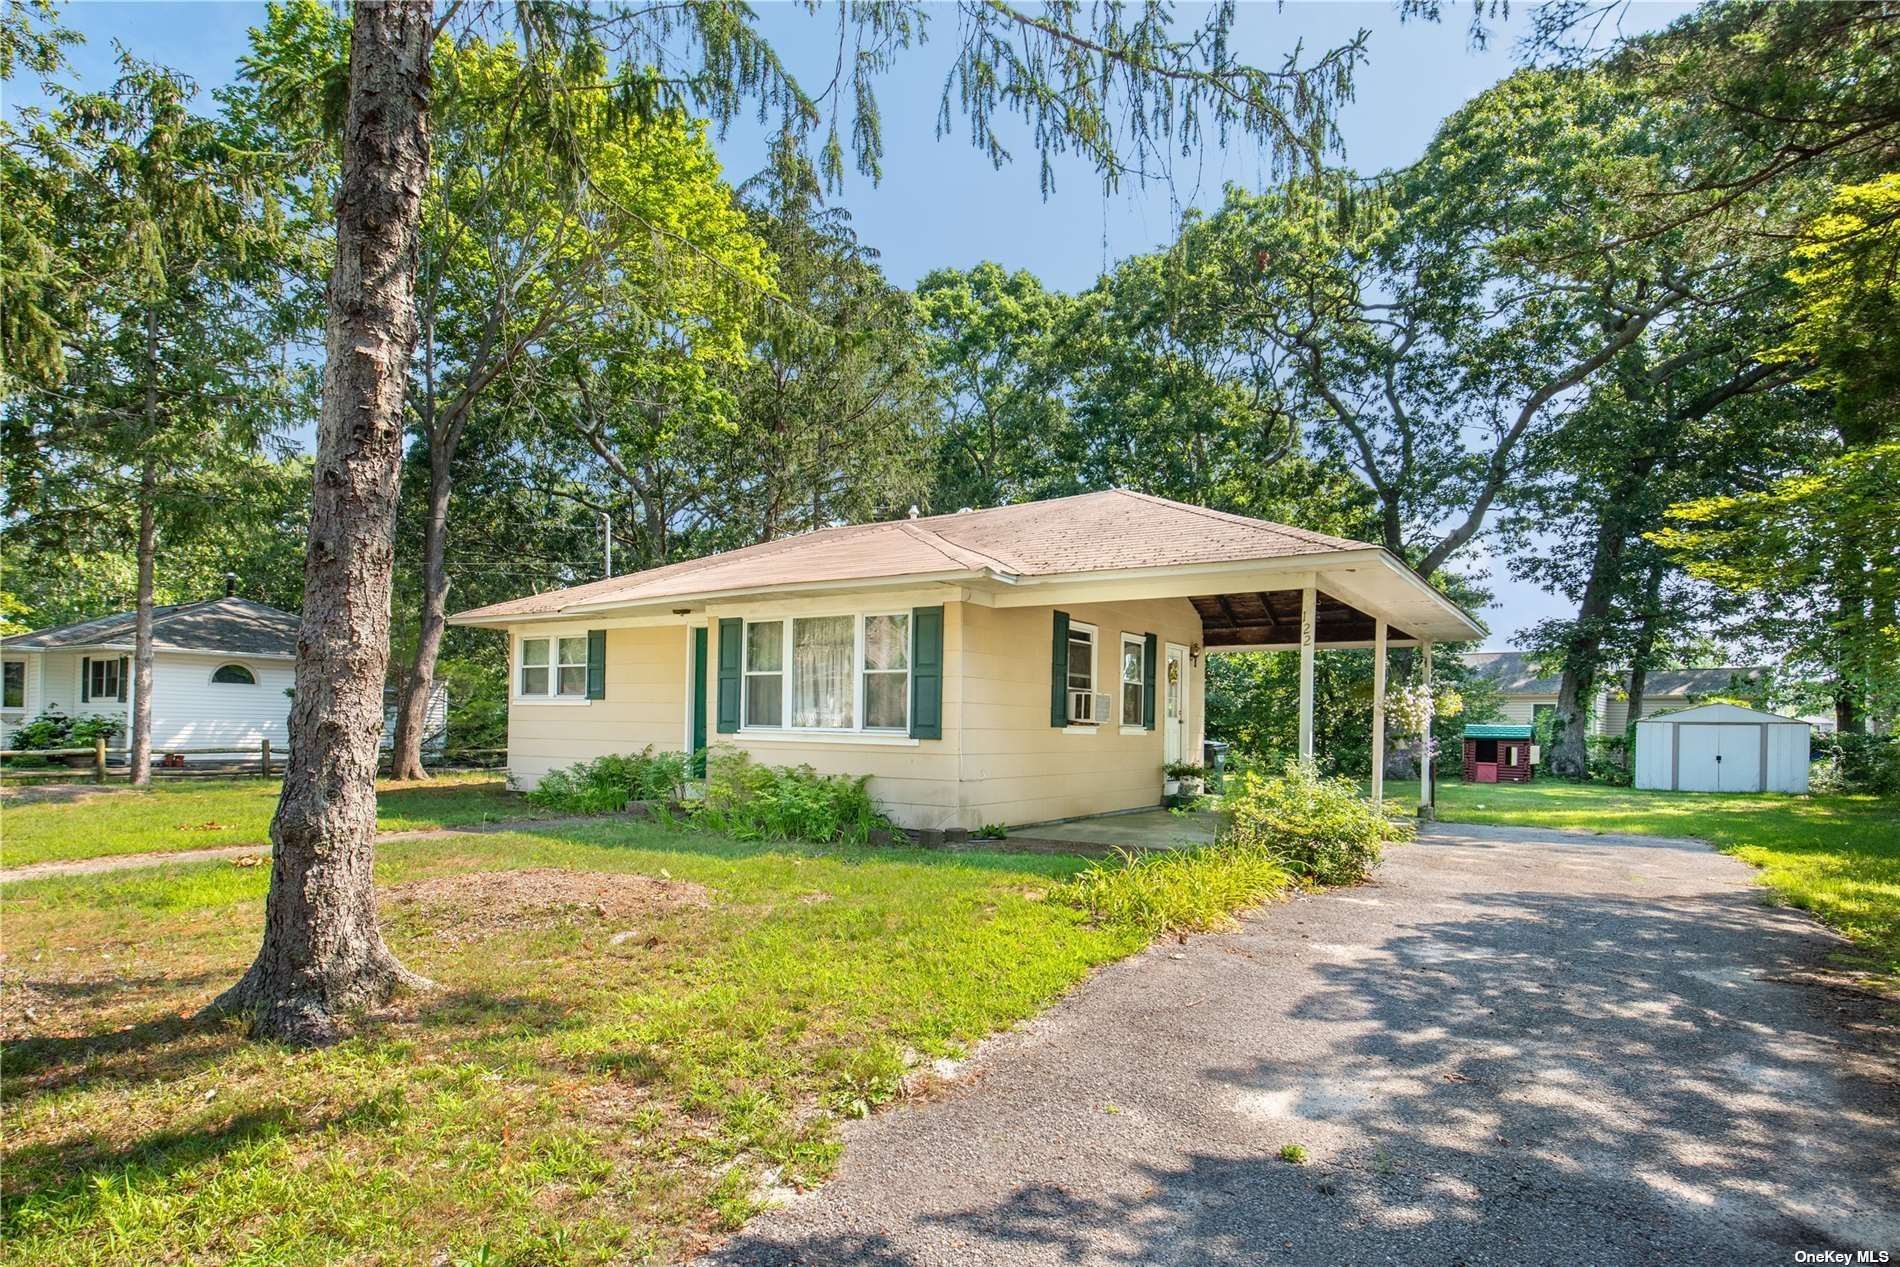 Listing in Flanders, NY